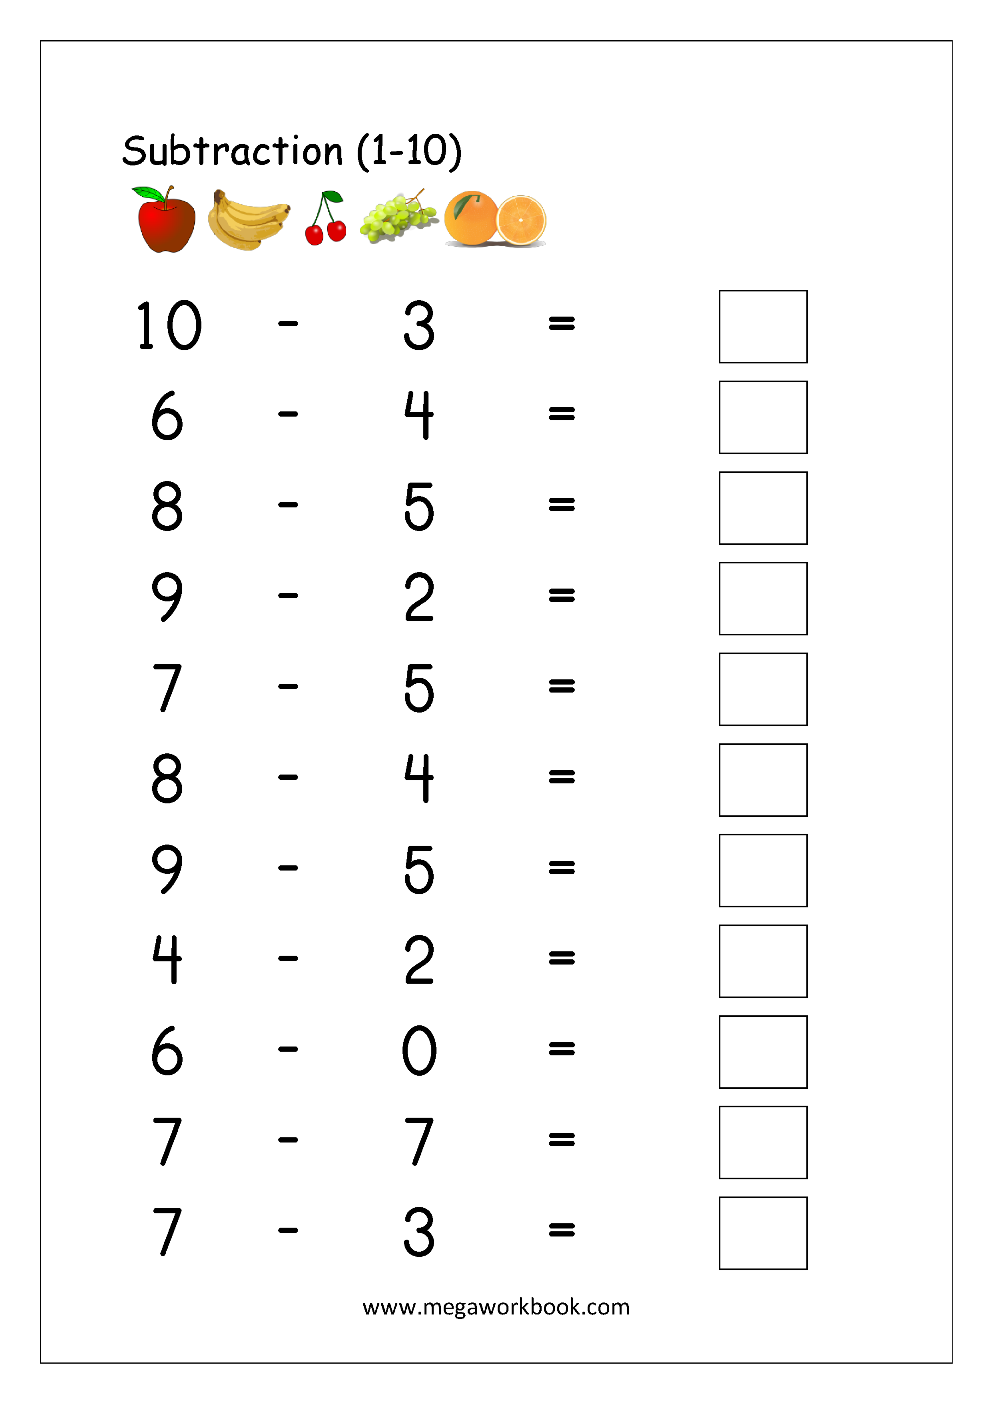 Free Printable Number Subtraction (1-10) Worksheets For Grade 1 And